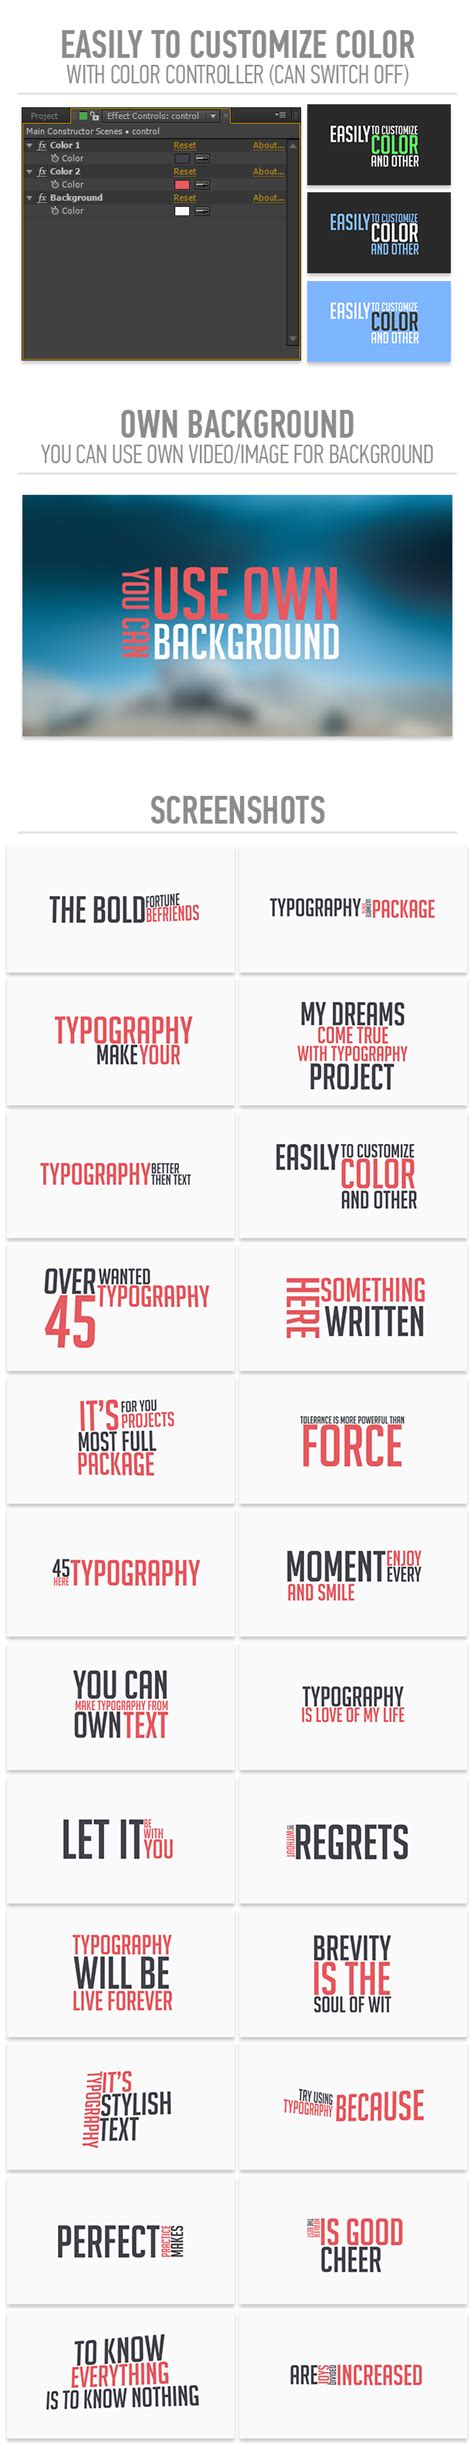 Ultimate Kinetic Typography Package By Aniom Videohive